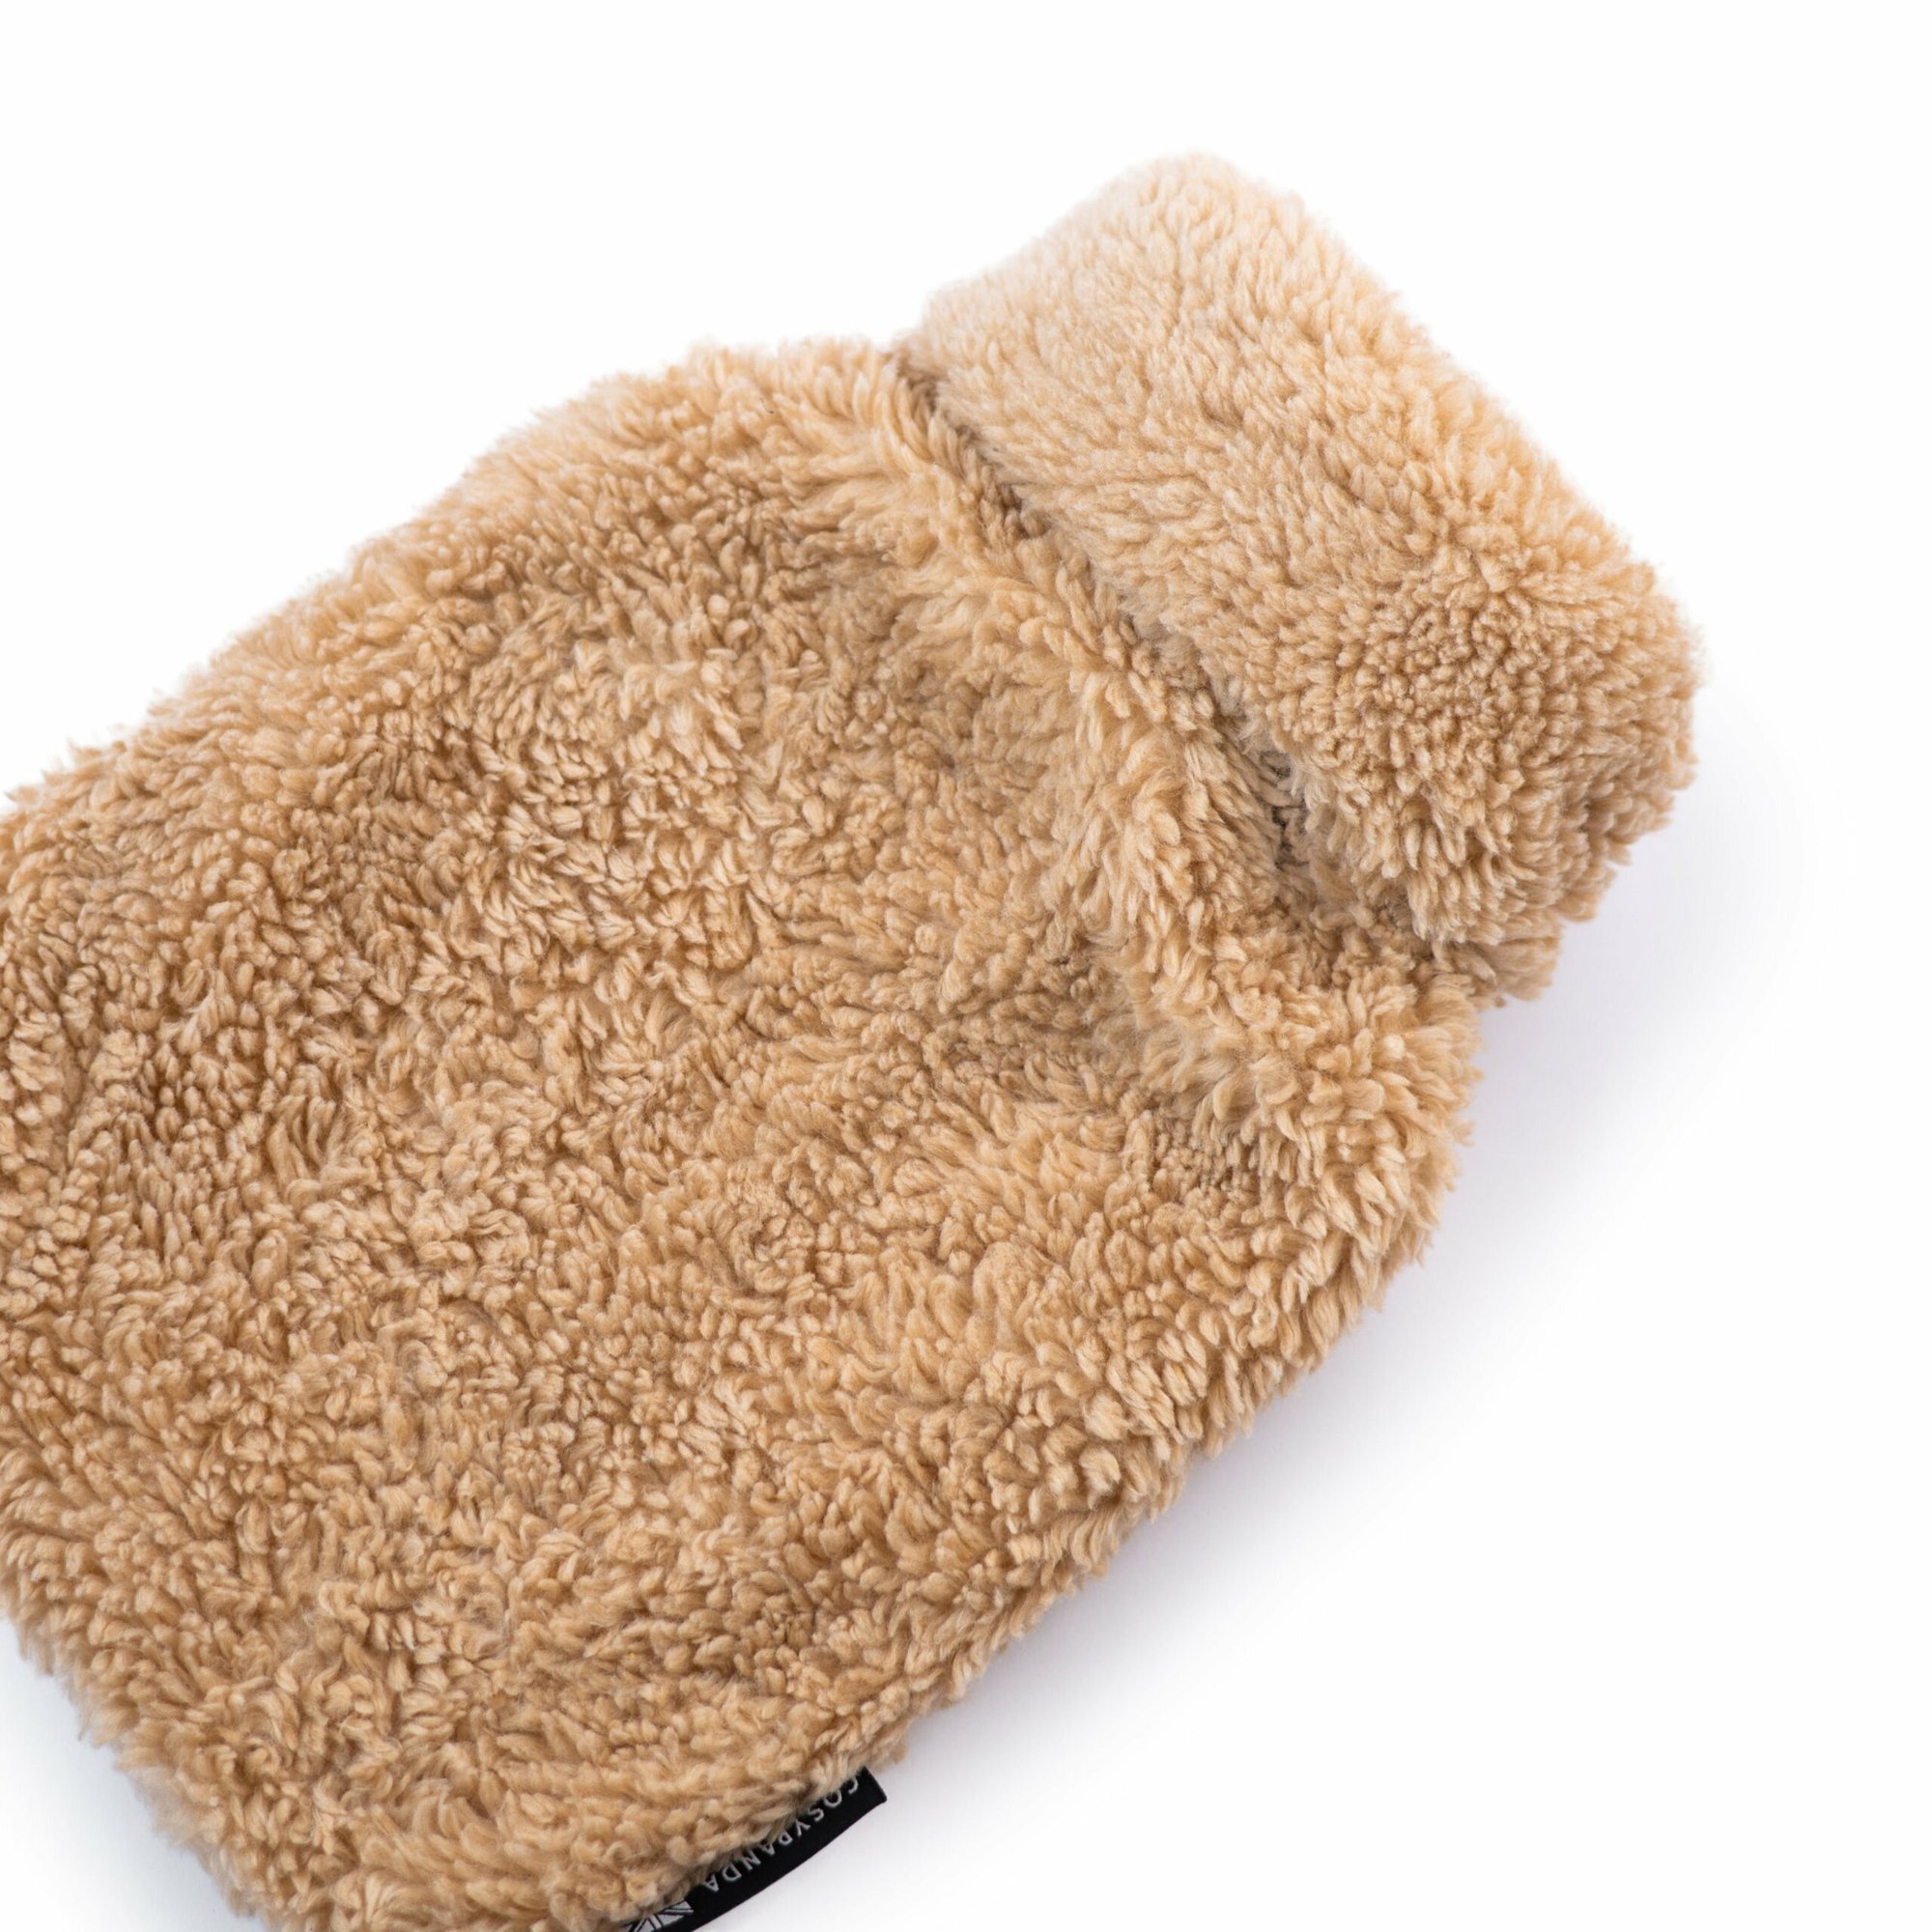 Teddy Hot Water Bottle - Made From Recycled Plastic